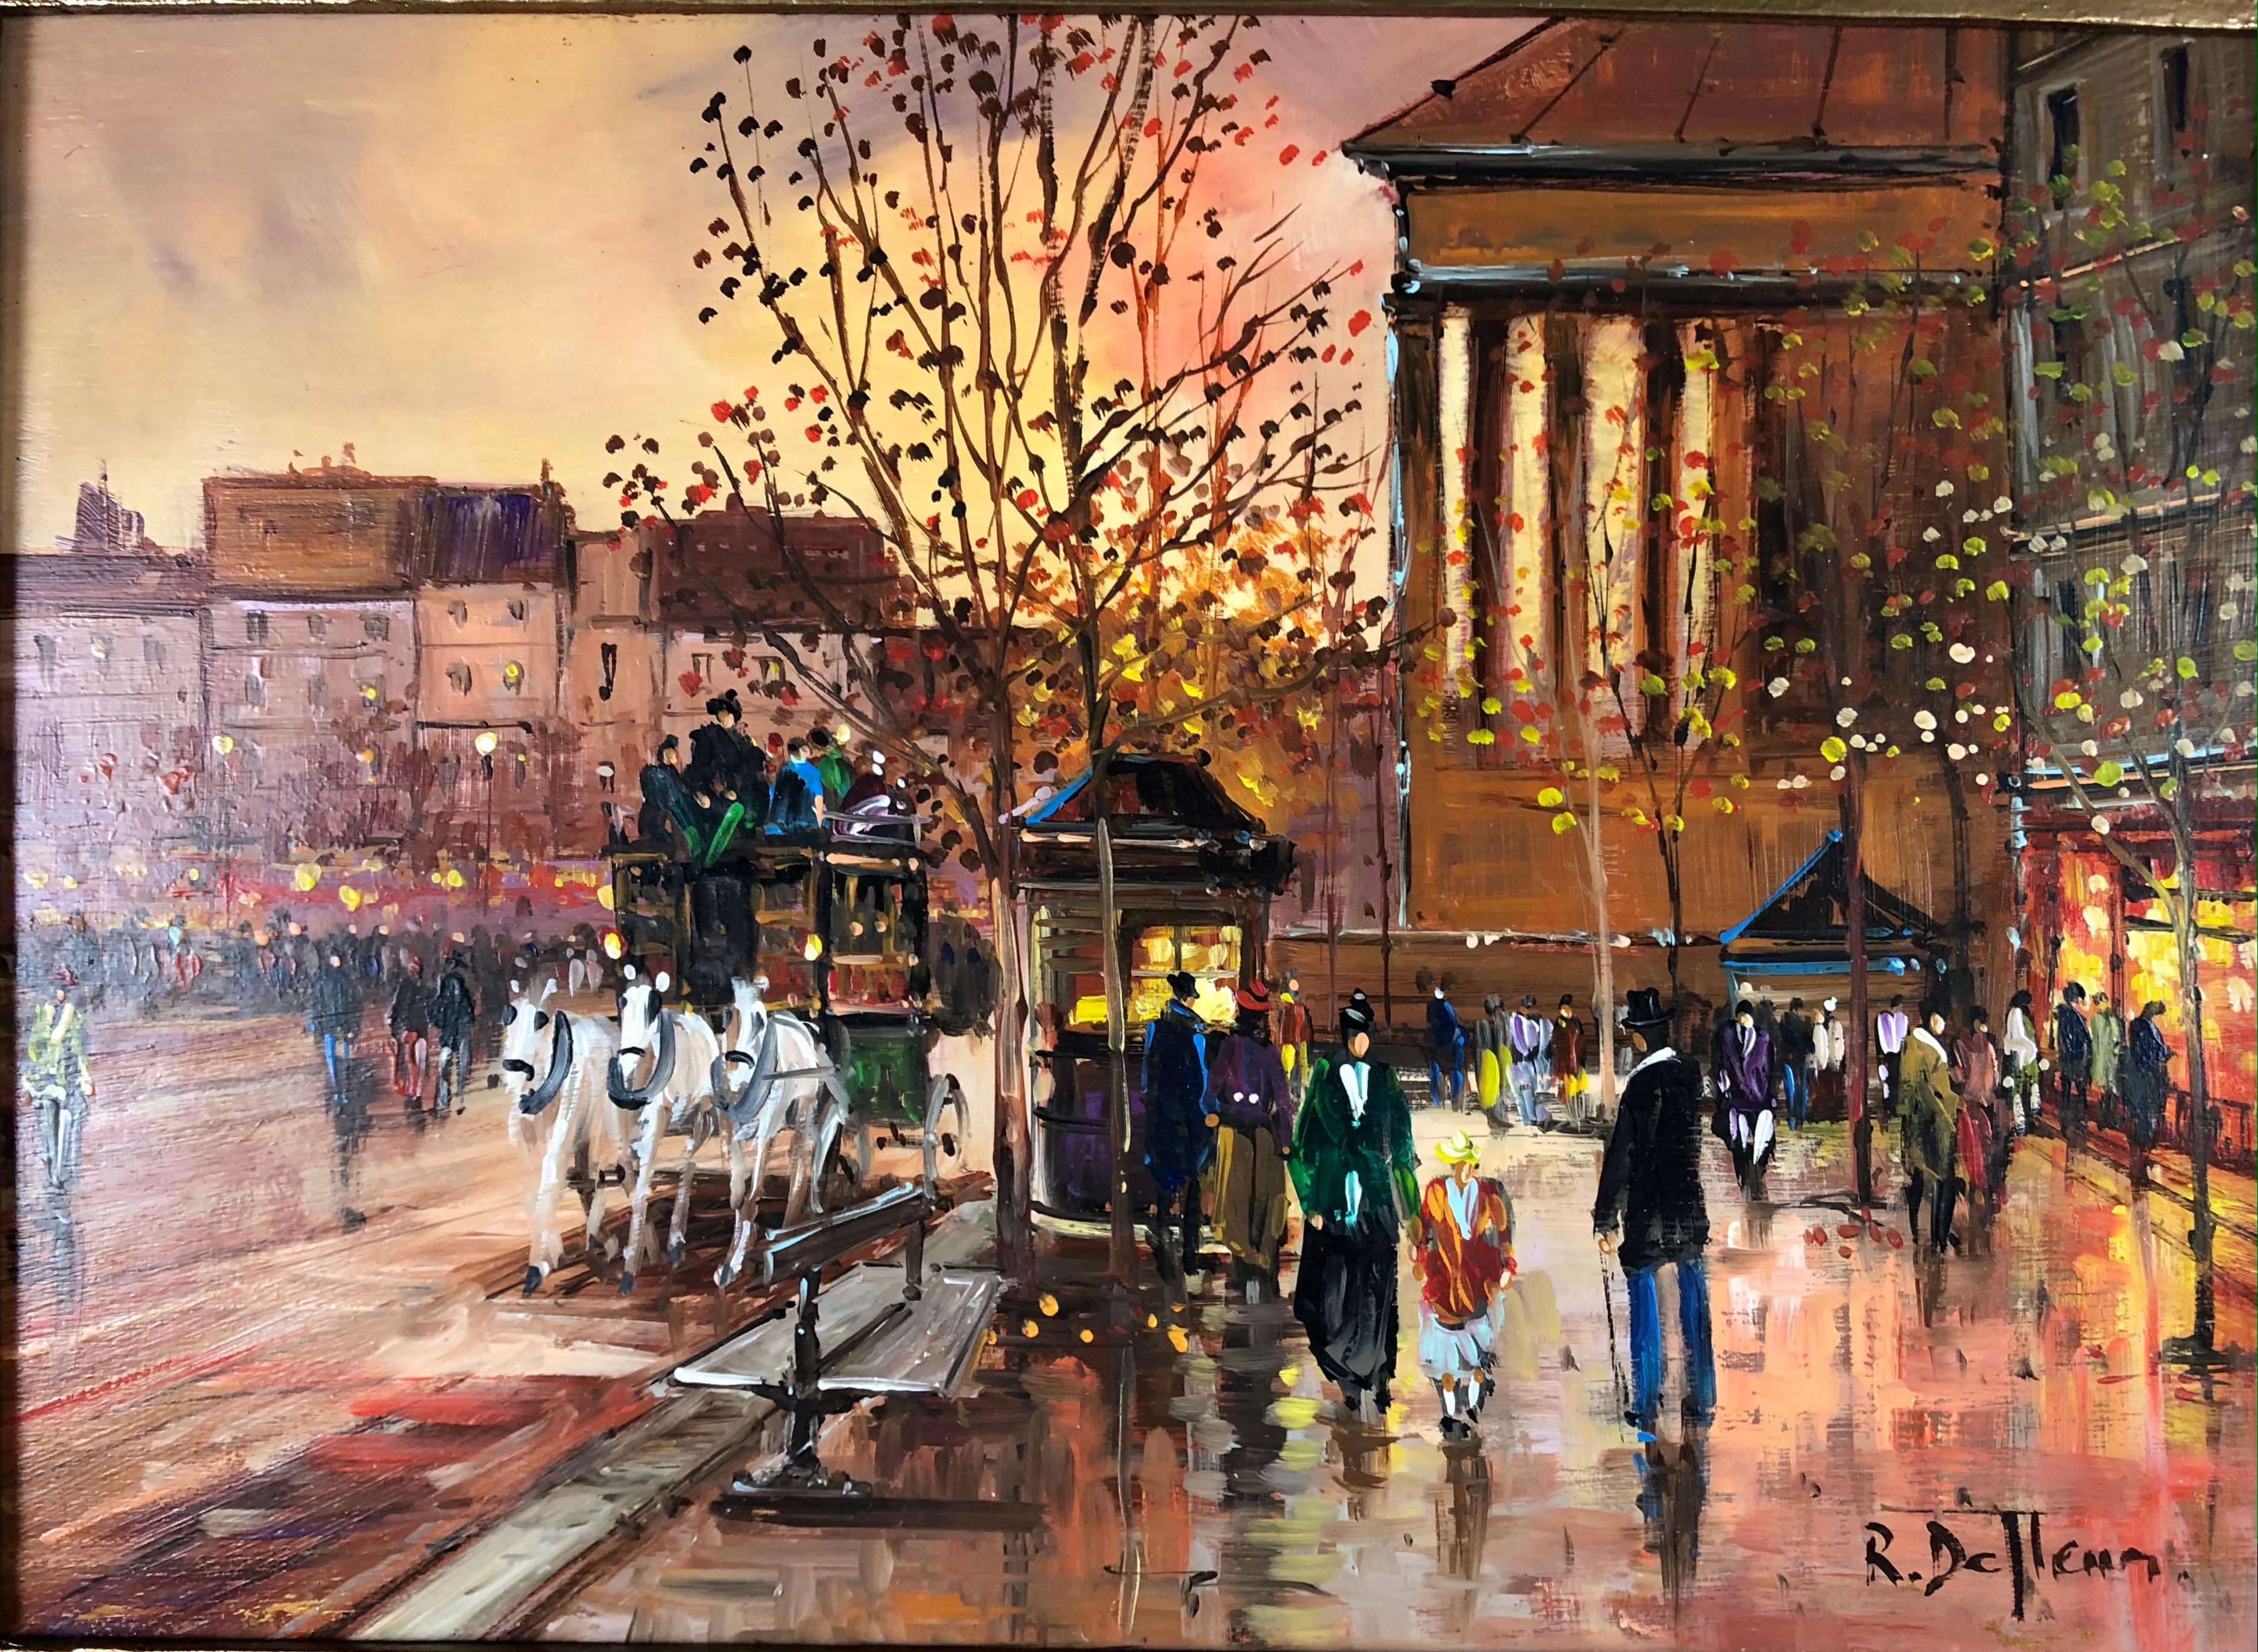 Stunning original painting in the manner of Edouard Léon Cortès
Boulevard De La Madeleine, Paris, France

This elegant, framed oil painting depicts scenes of 19th century Paris, France. Glistening early evening lights from shops and cafes